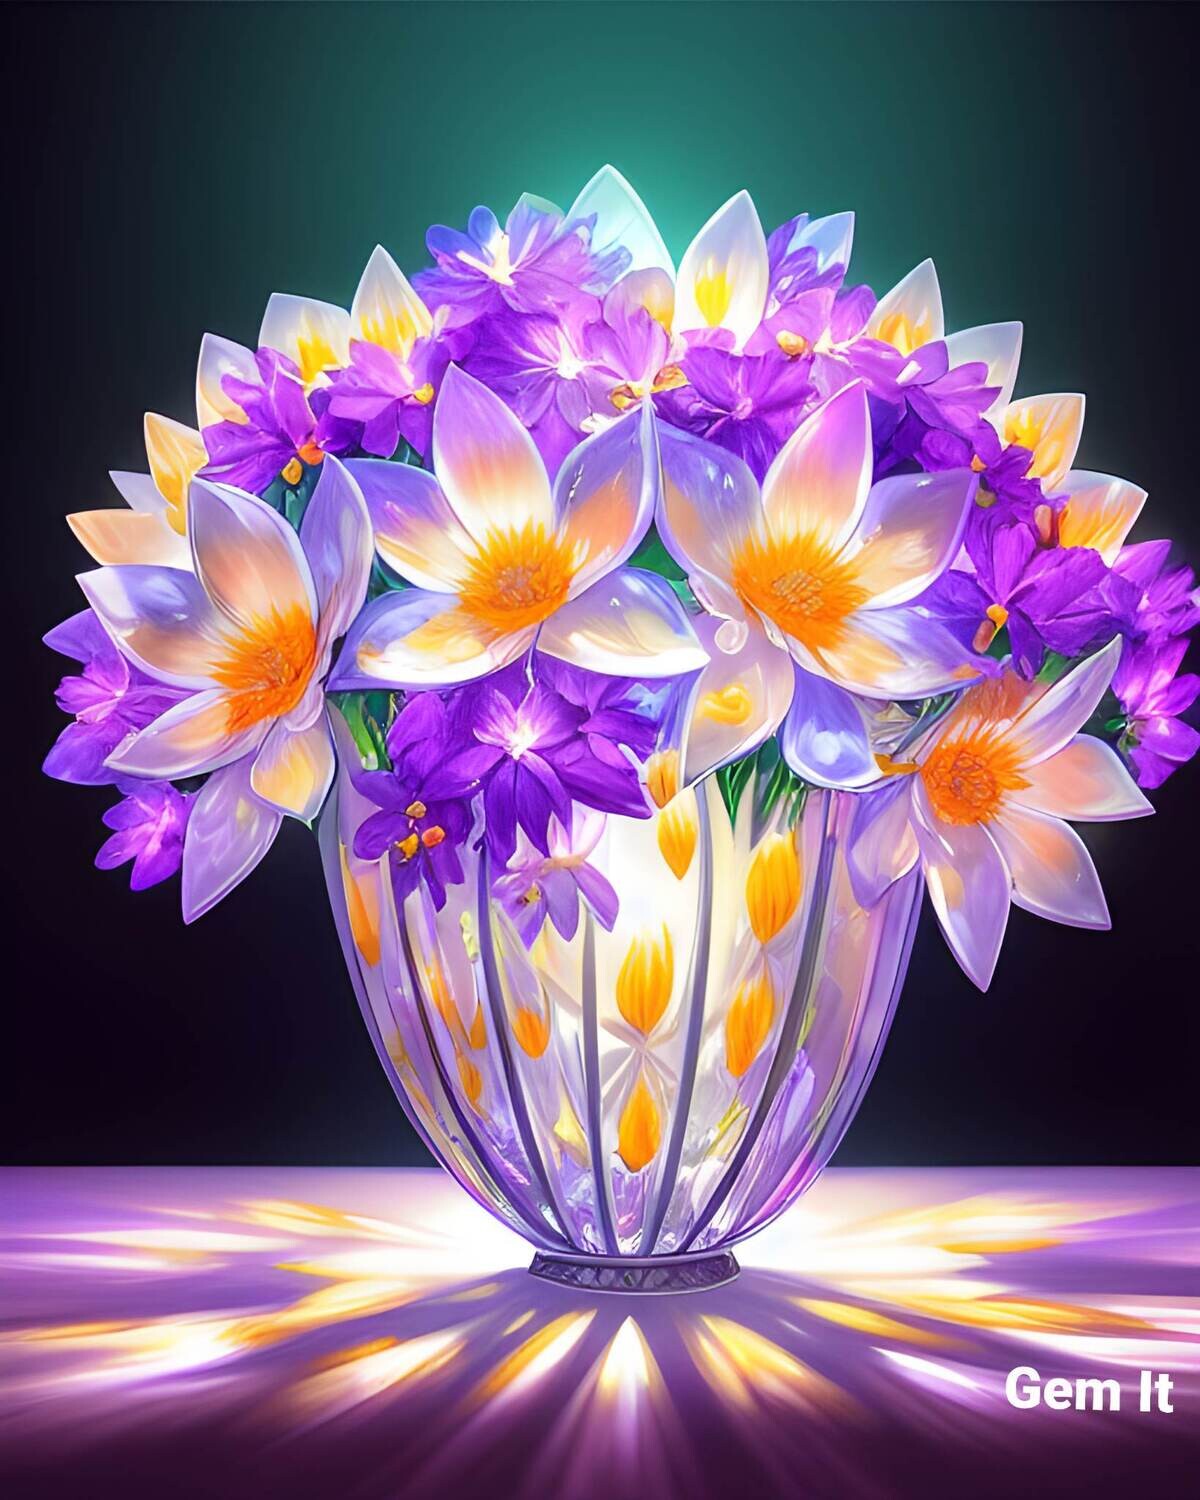 Crystal Vase of Flowers 1 - Specially ordered for you. Delivery is approximately 4 - 6 weeks.